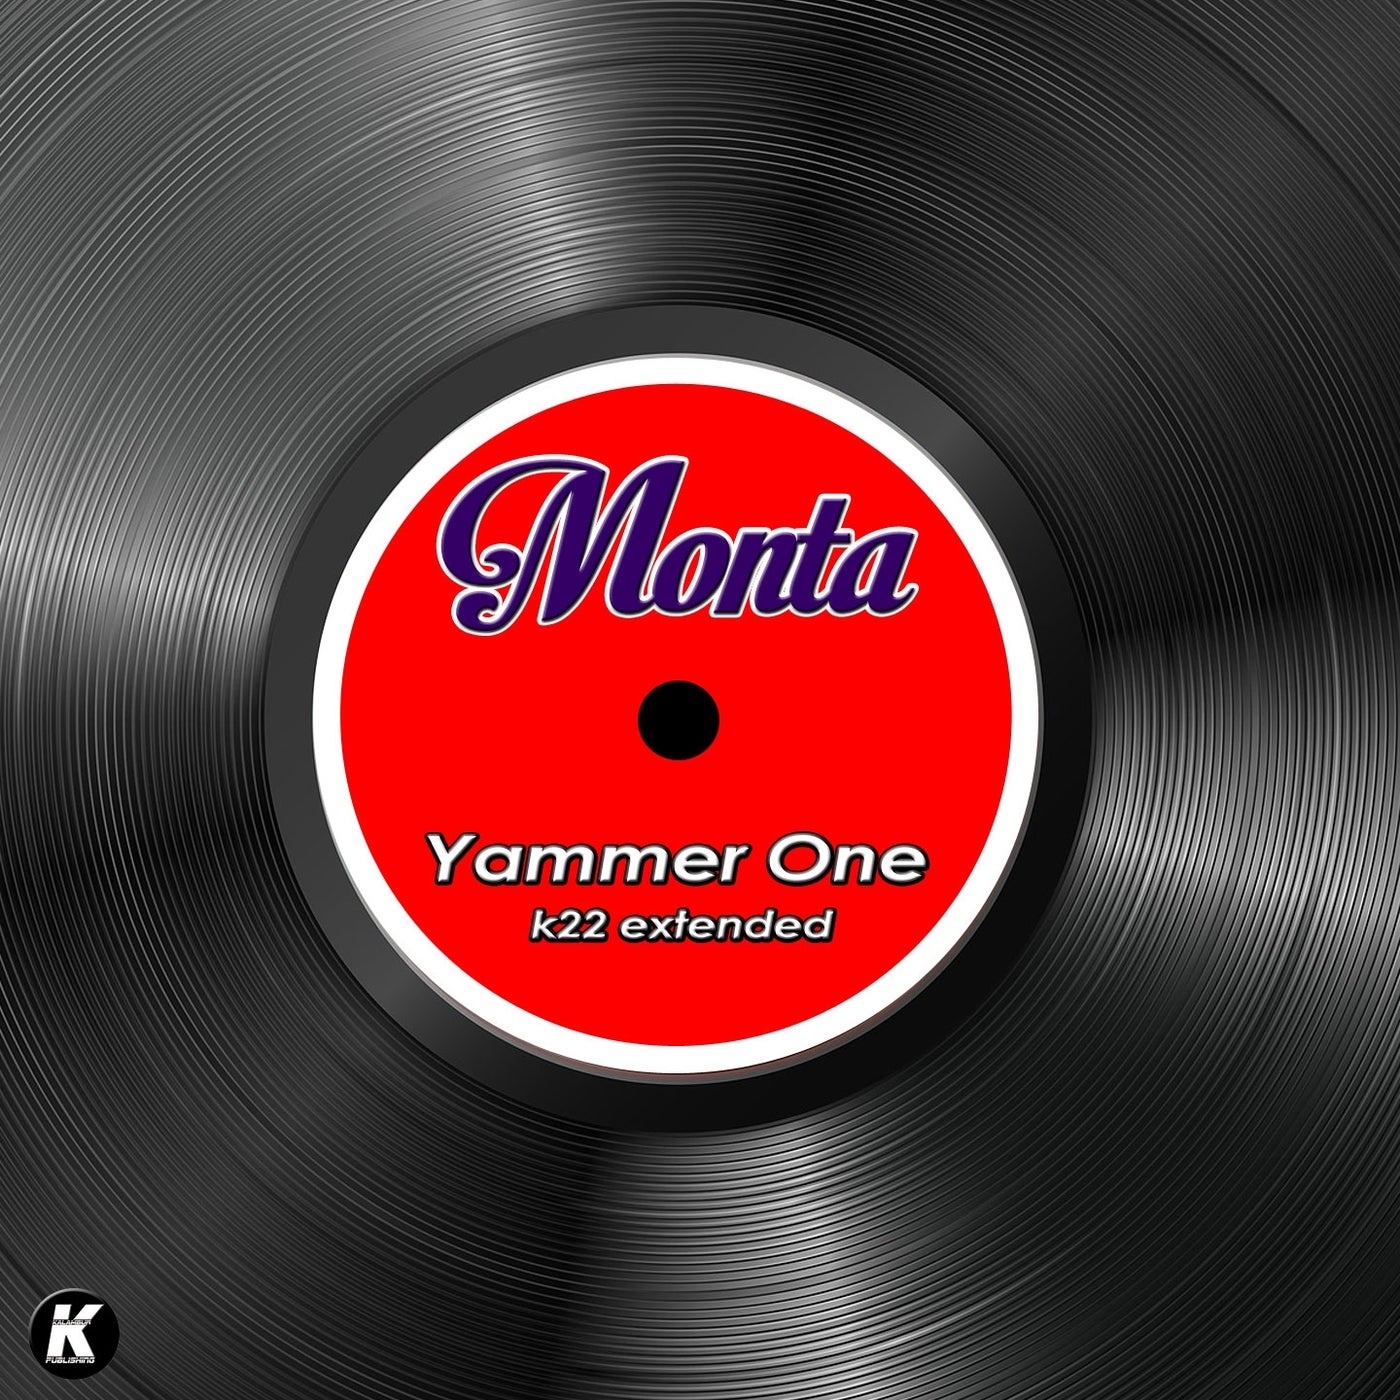 YAMMER ONE (K22 extended)